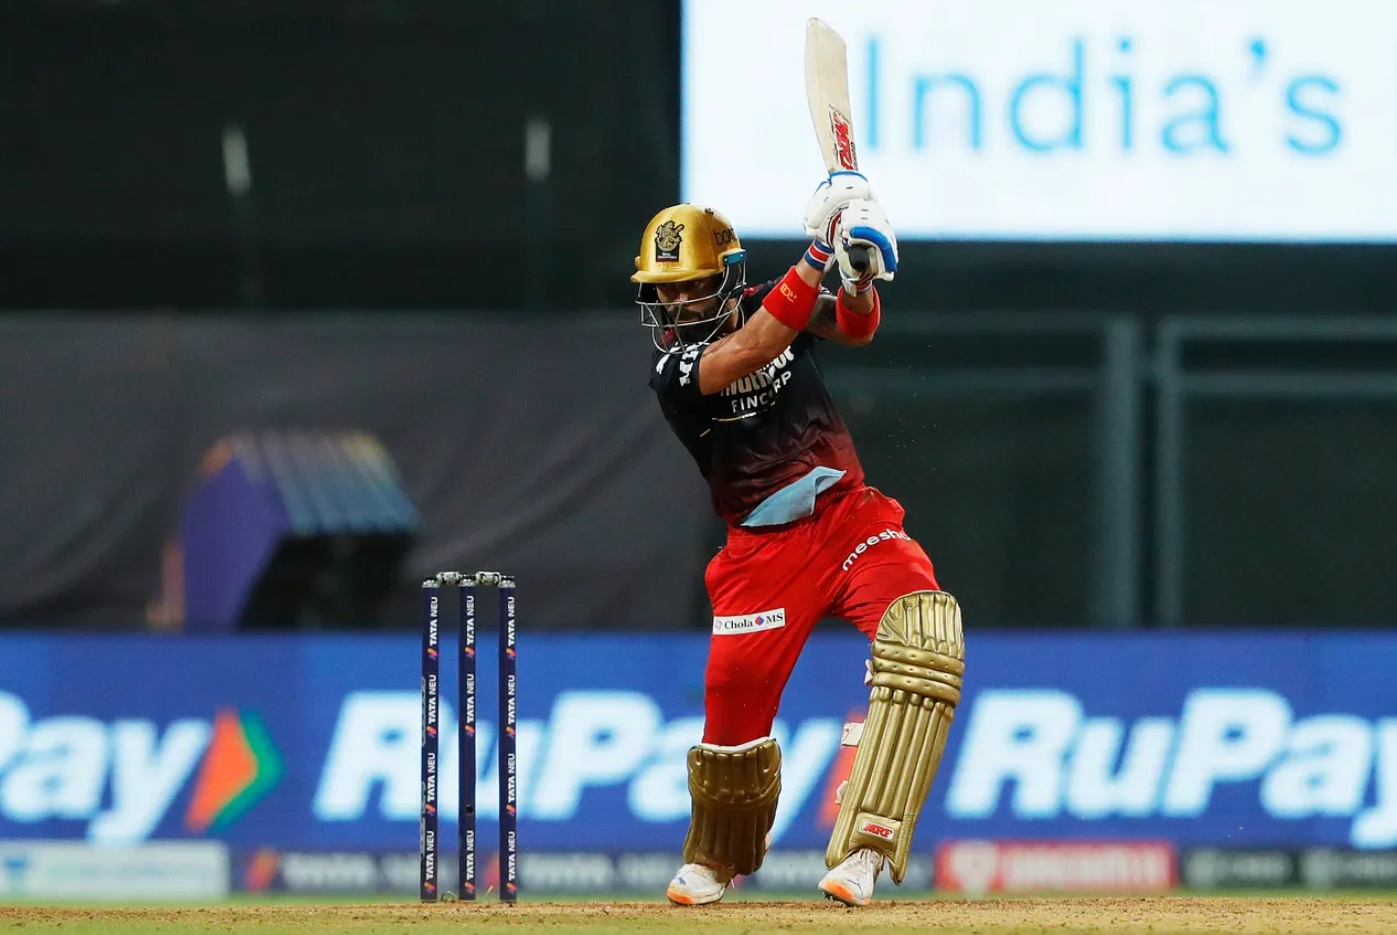 IPL 2022, GT vs RCB | Virat Kohli achieves unique feat, becomes first to complete 7000 runs for single franchise